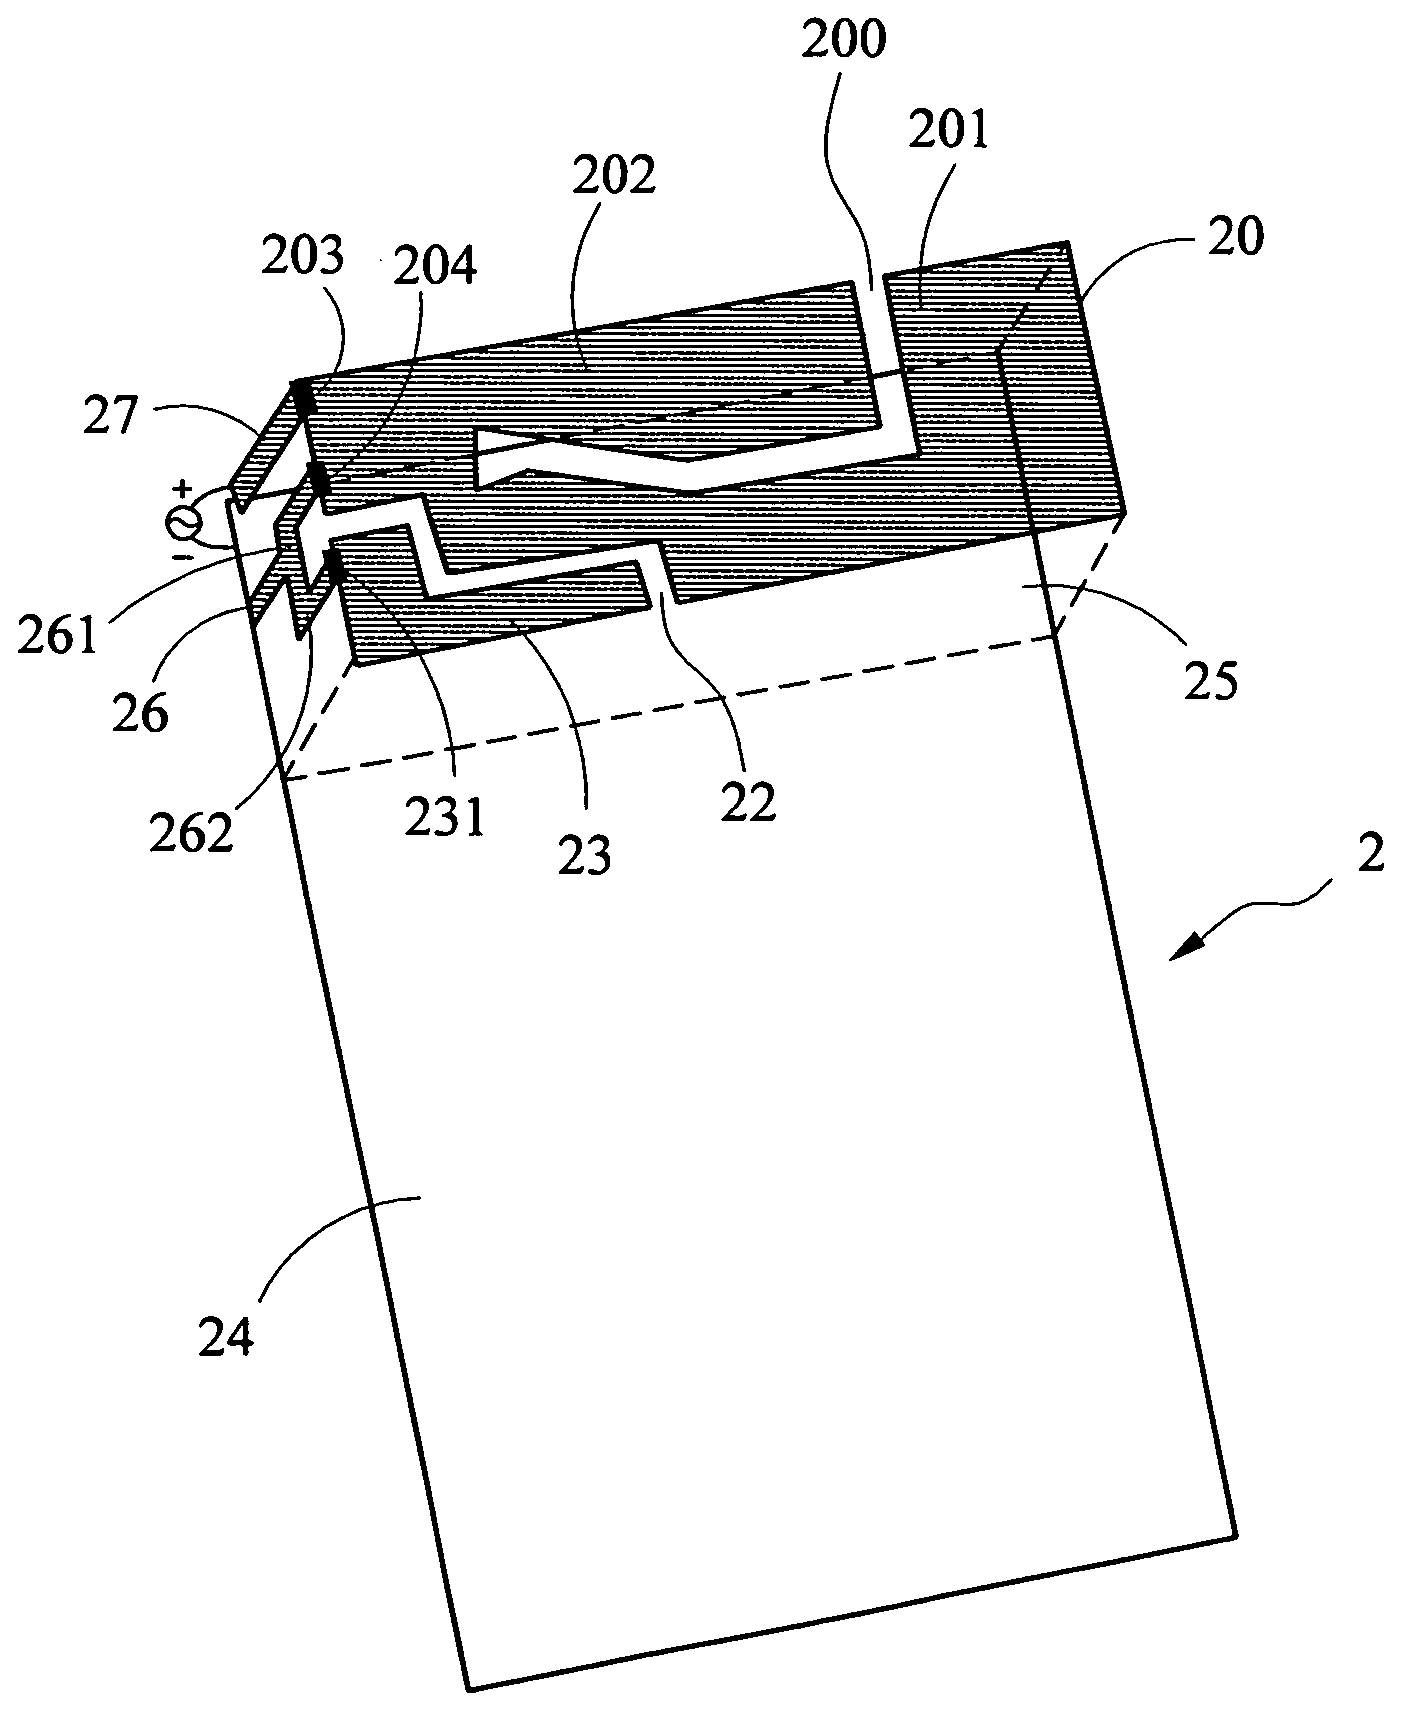 Dual-band inverted-F antenna with a branch line shorting strip